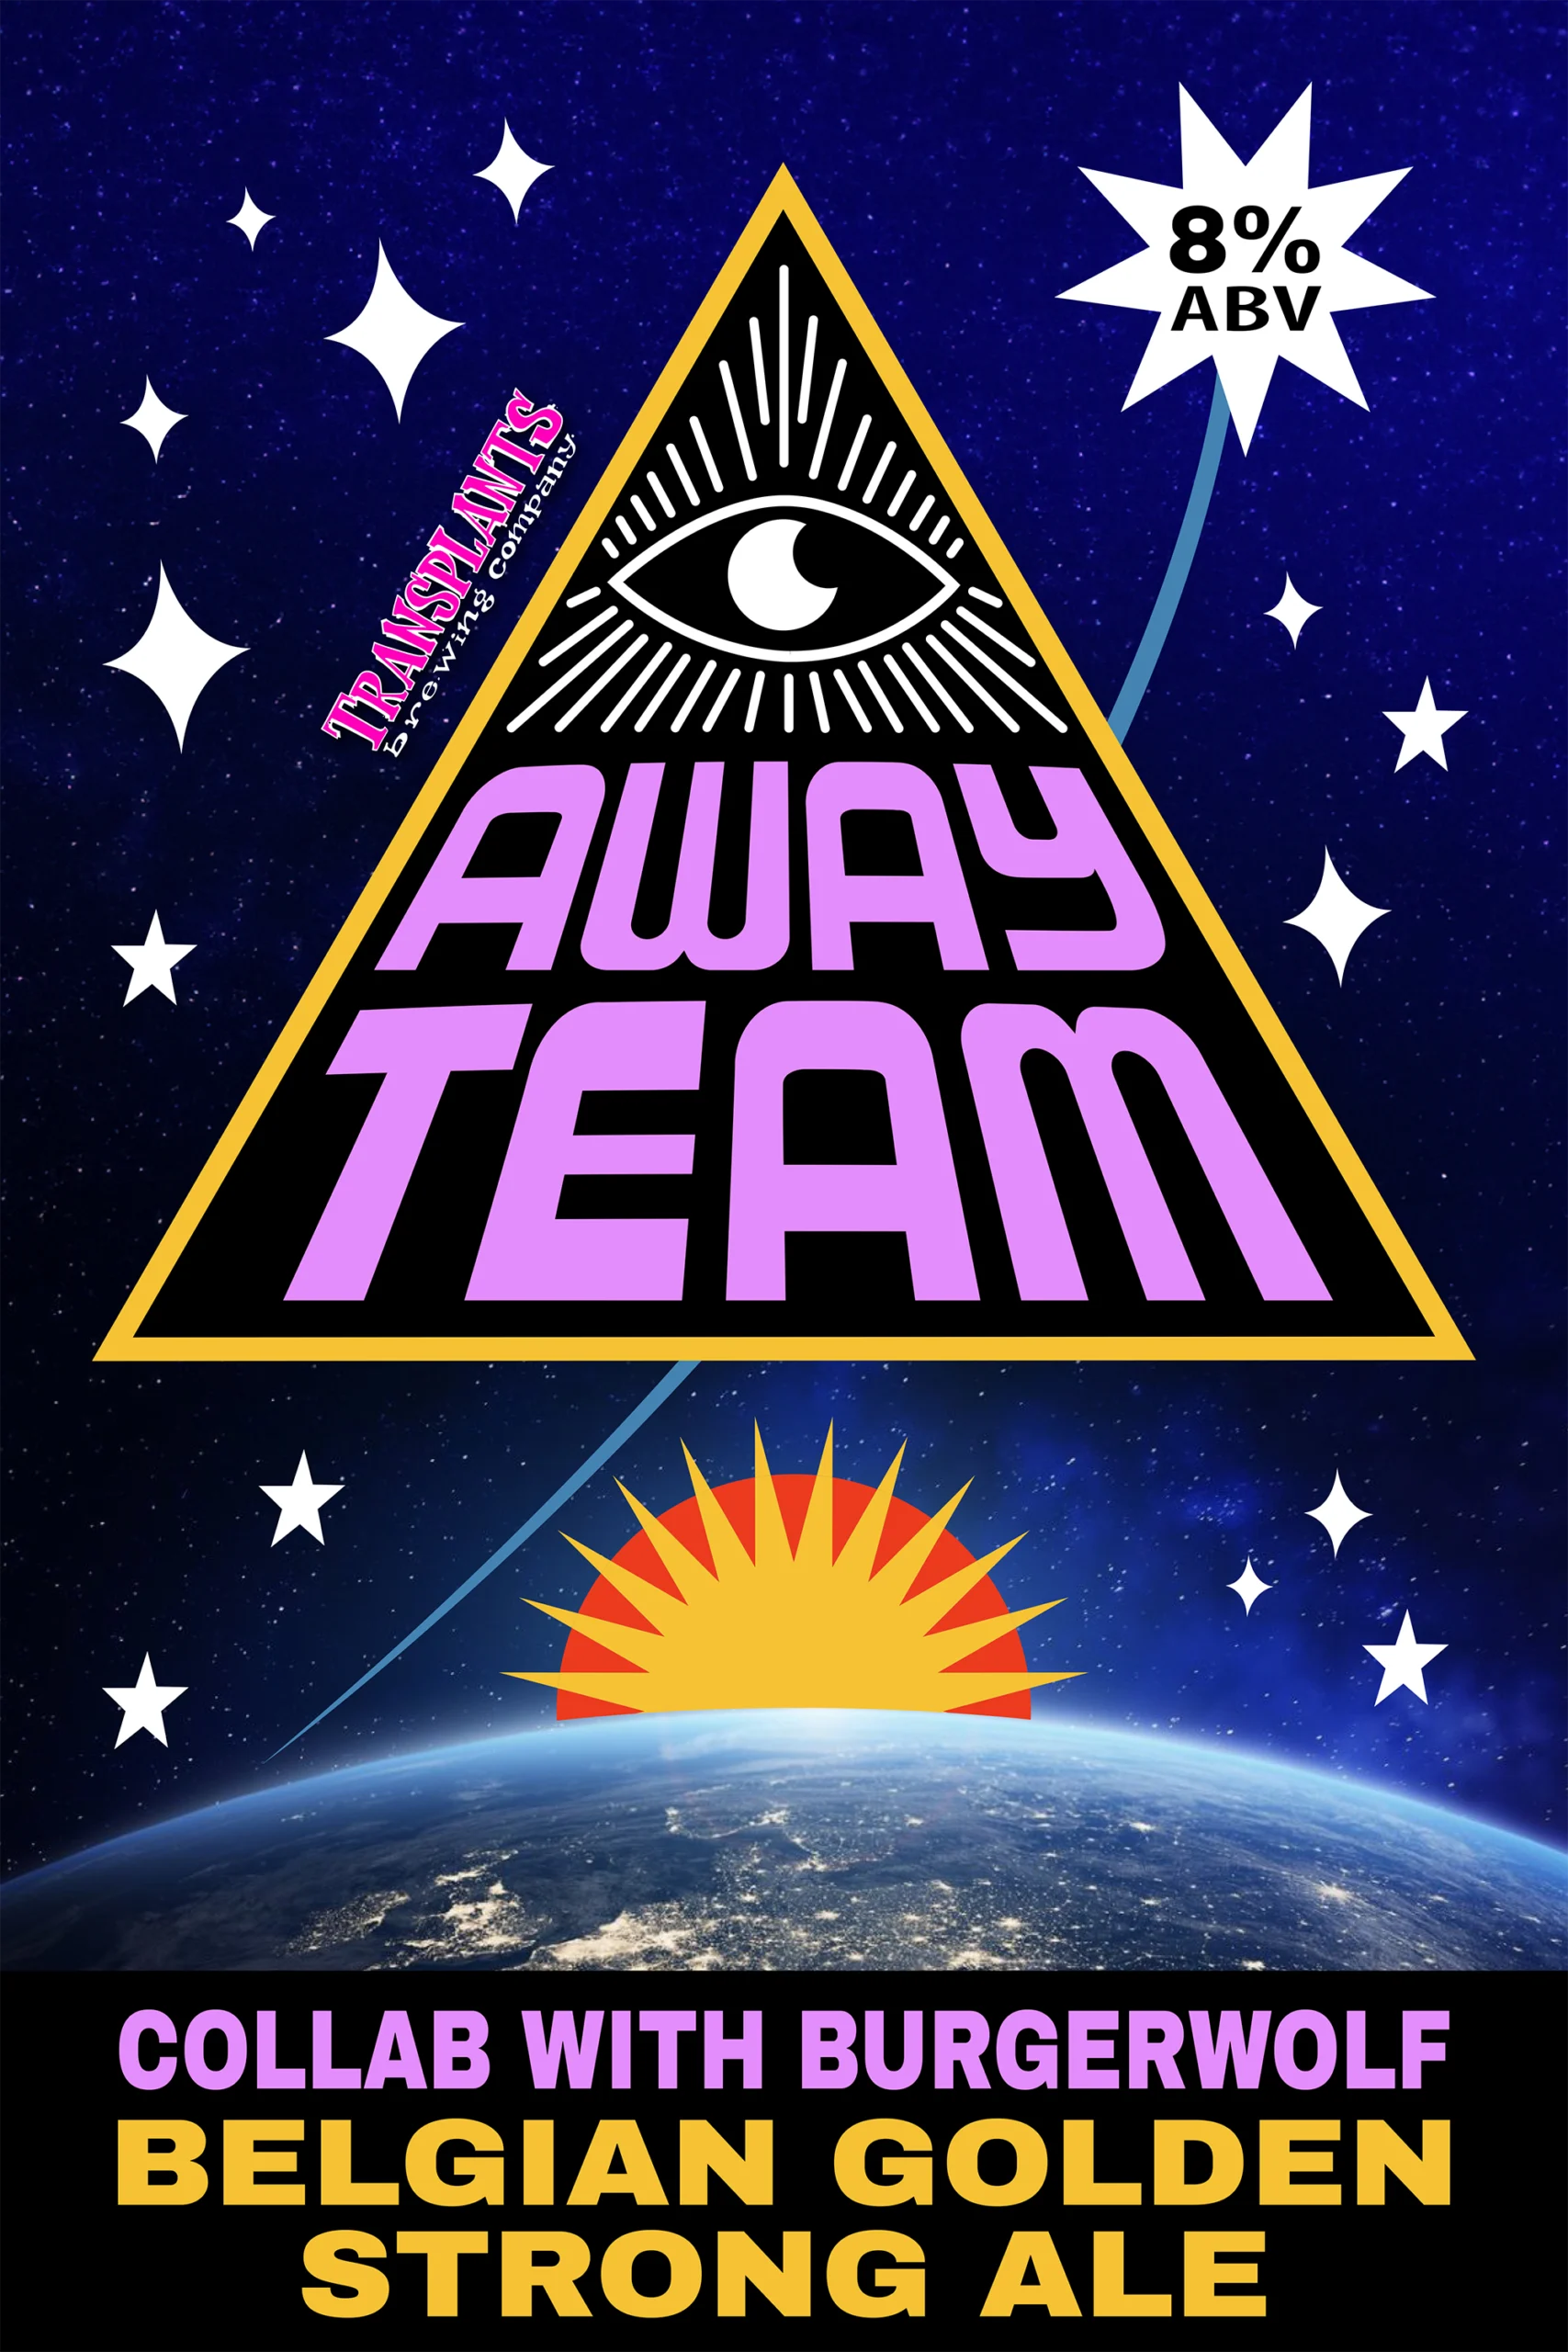 Poster representing the beverage AWAY TEAM, a beer with an alcohol content of 8%, available on tap at Transplants Brewing